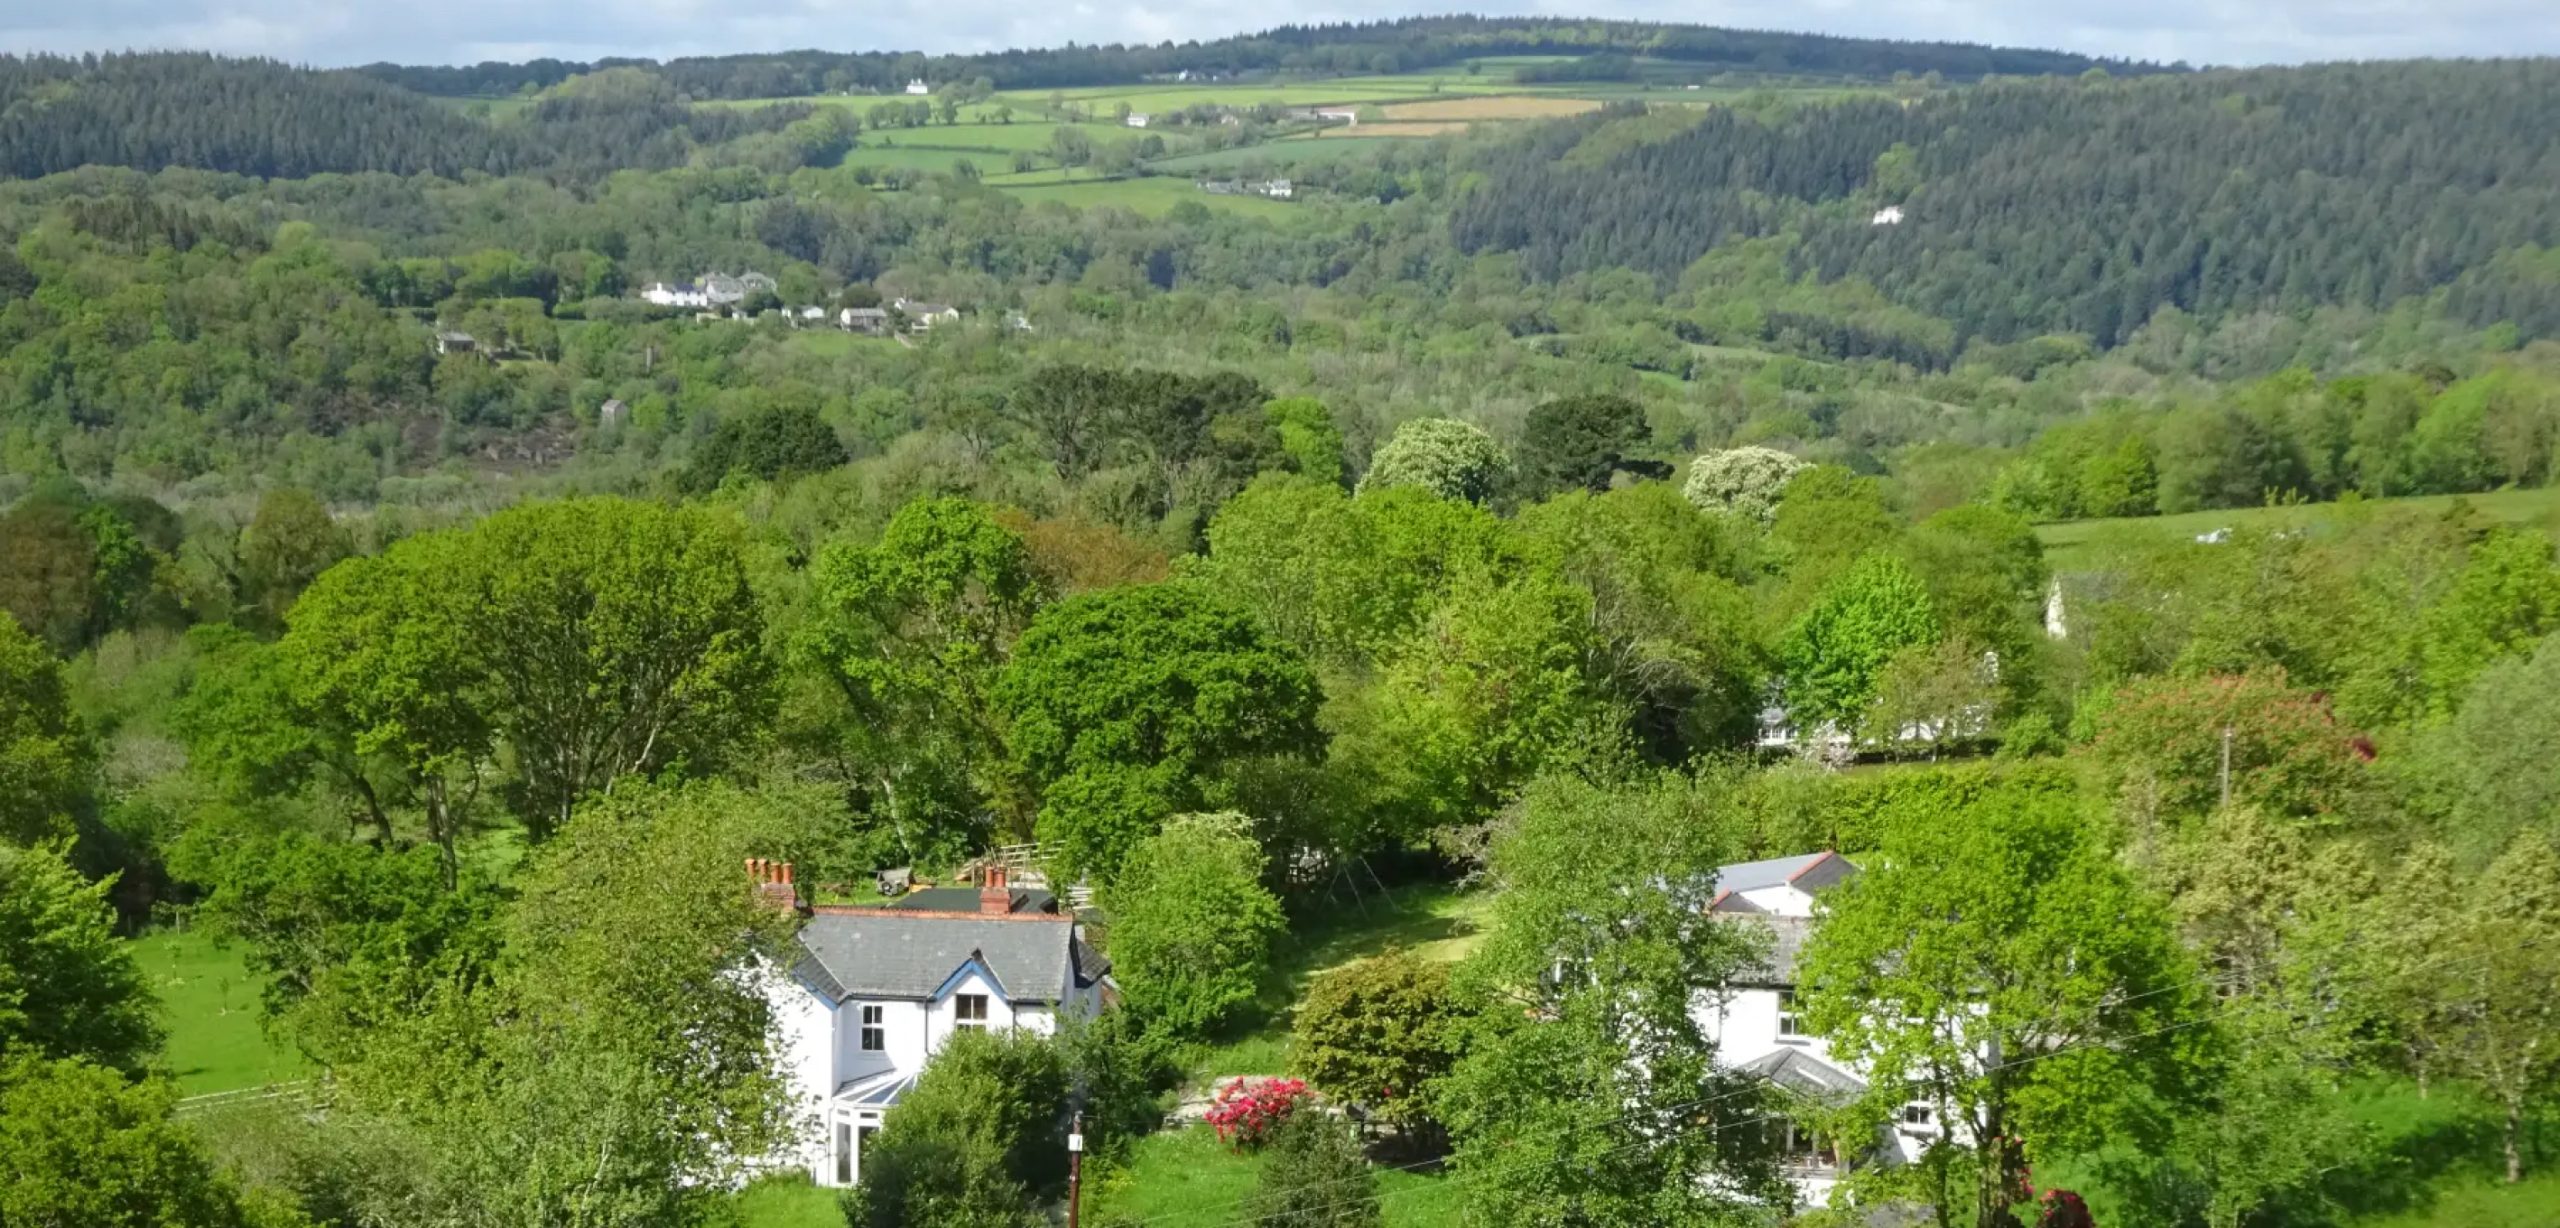 A Tamar and Tavy Valley Circular from Bere Alston Station